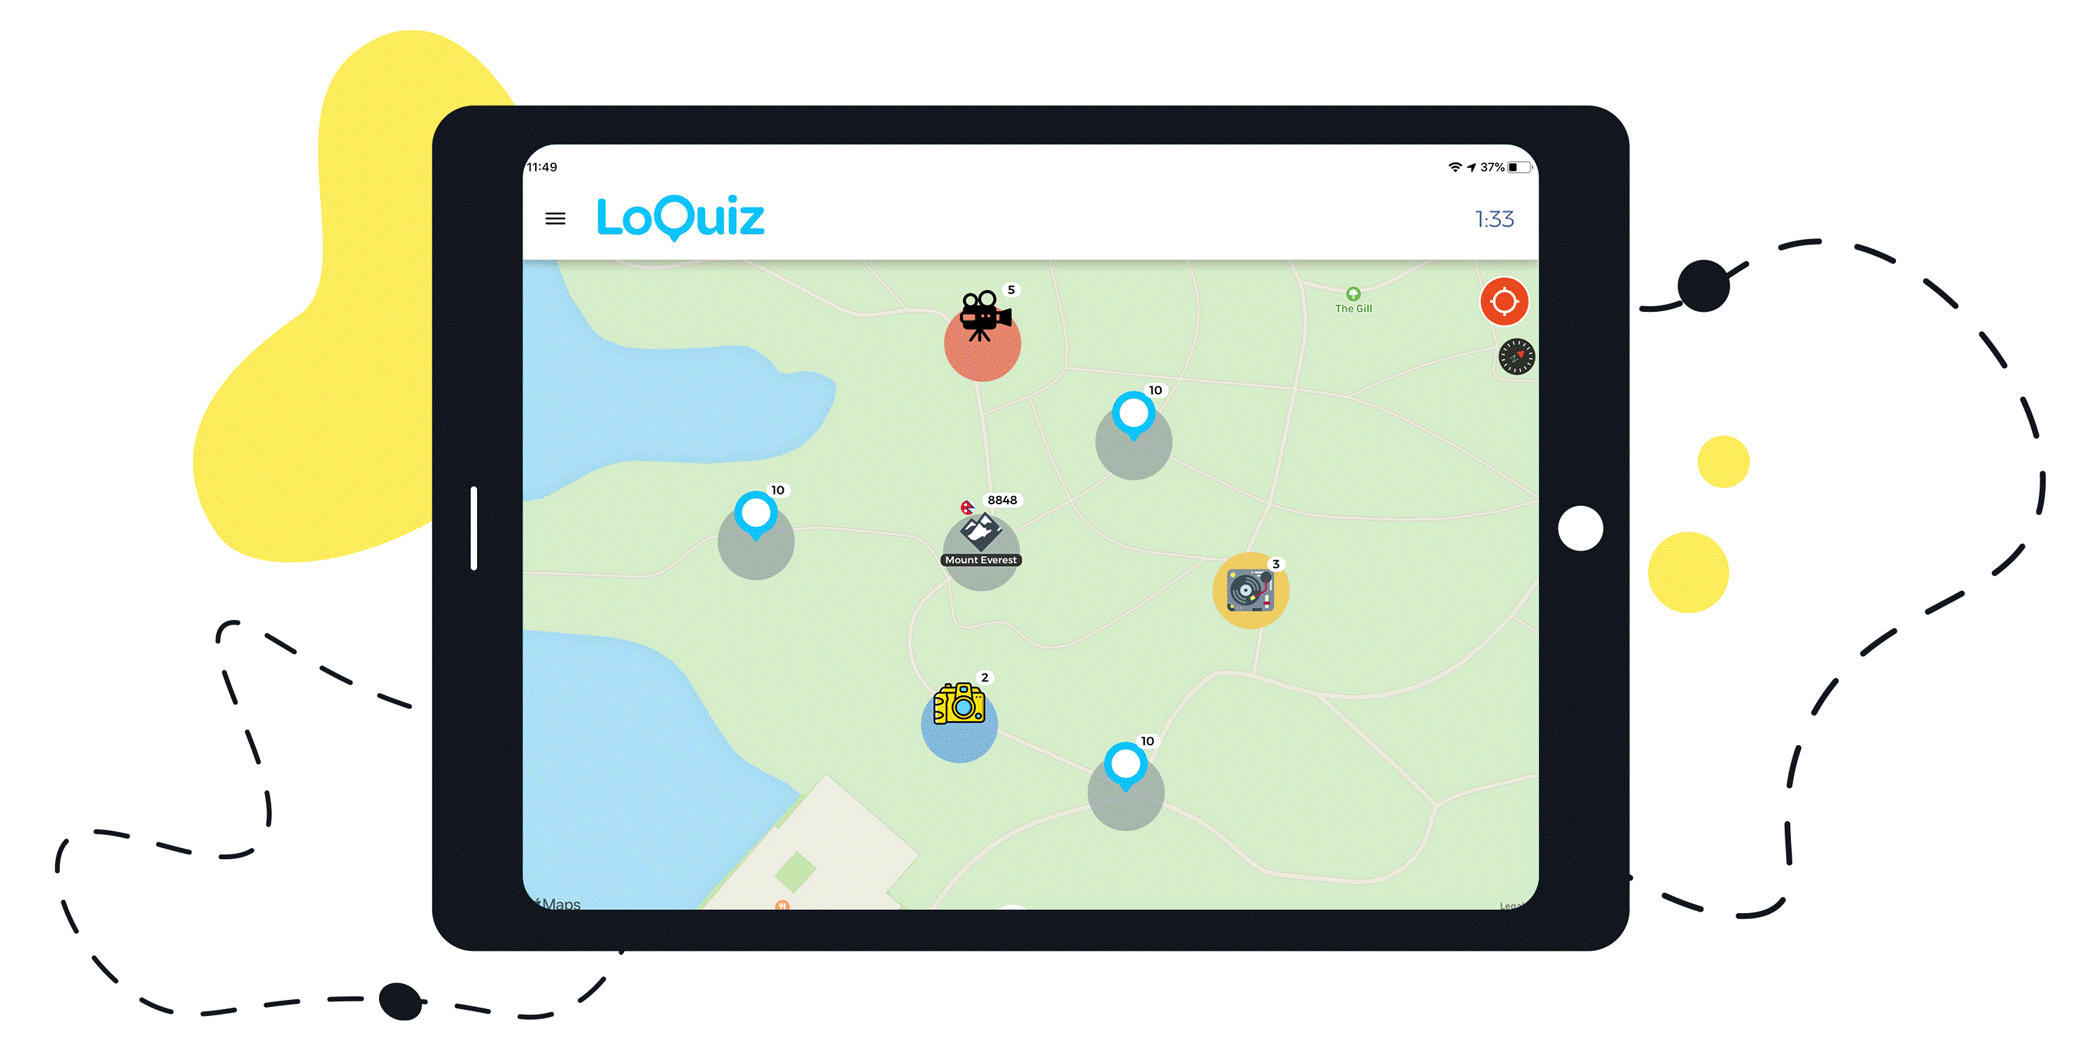 This is how Loquiz looks like on a tablet. You can make a college scavenger hunt look like this.